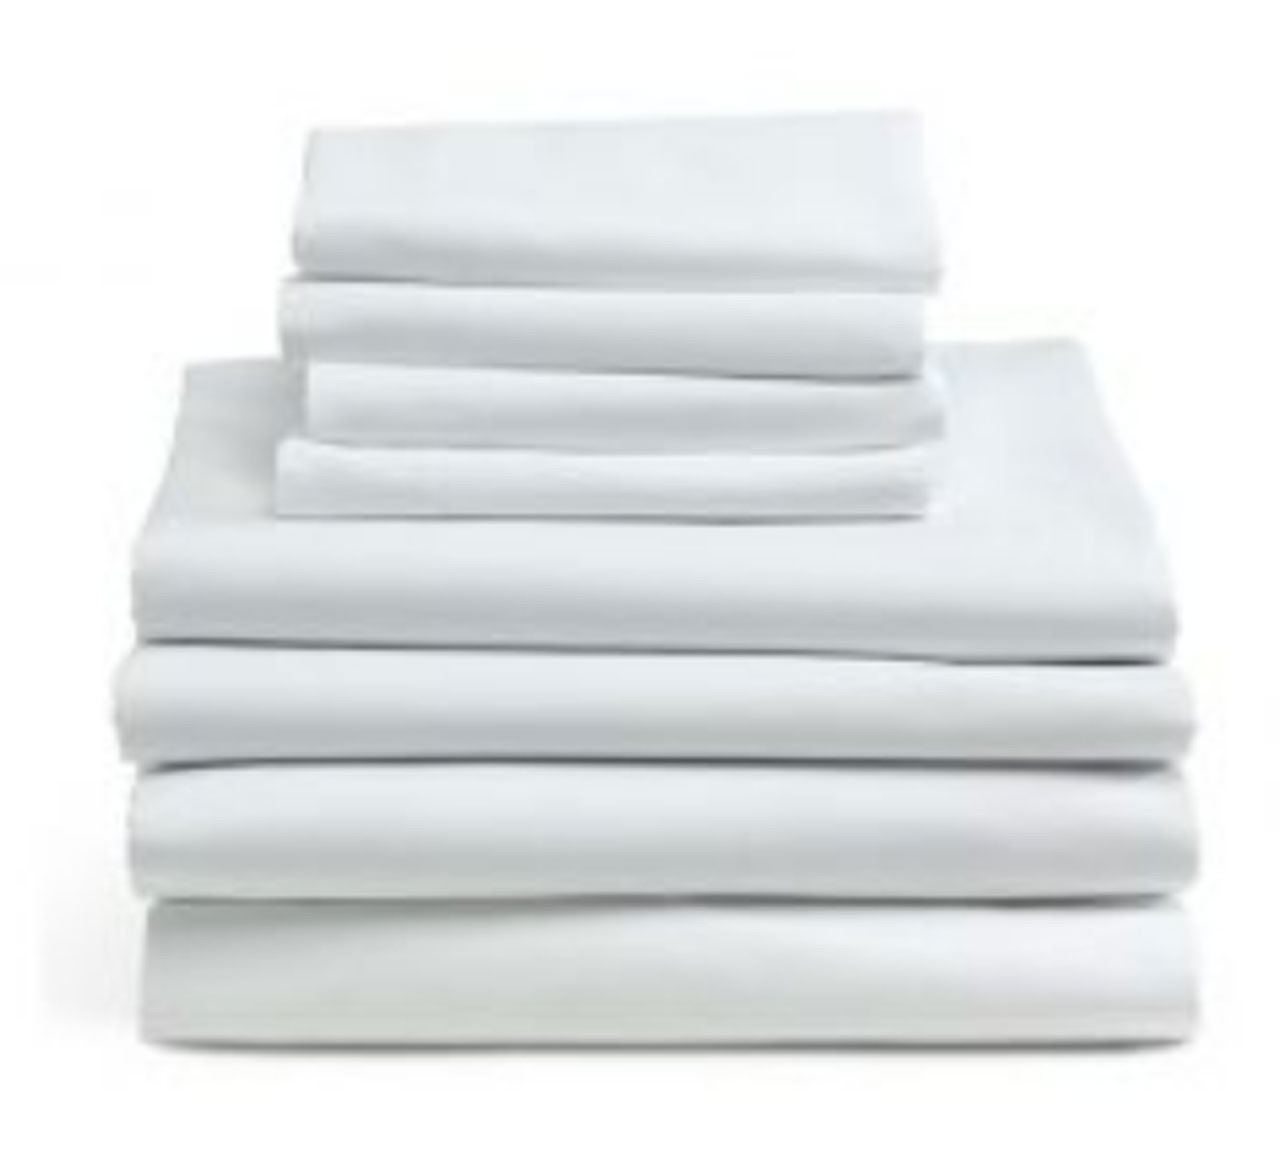 What is a distinctive feature of the Royal Star wholesale T-180 Hospitality Bed Sheets?